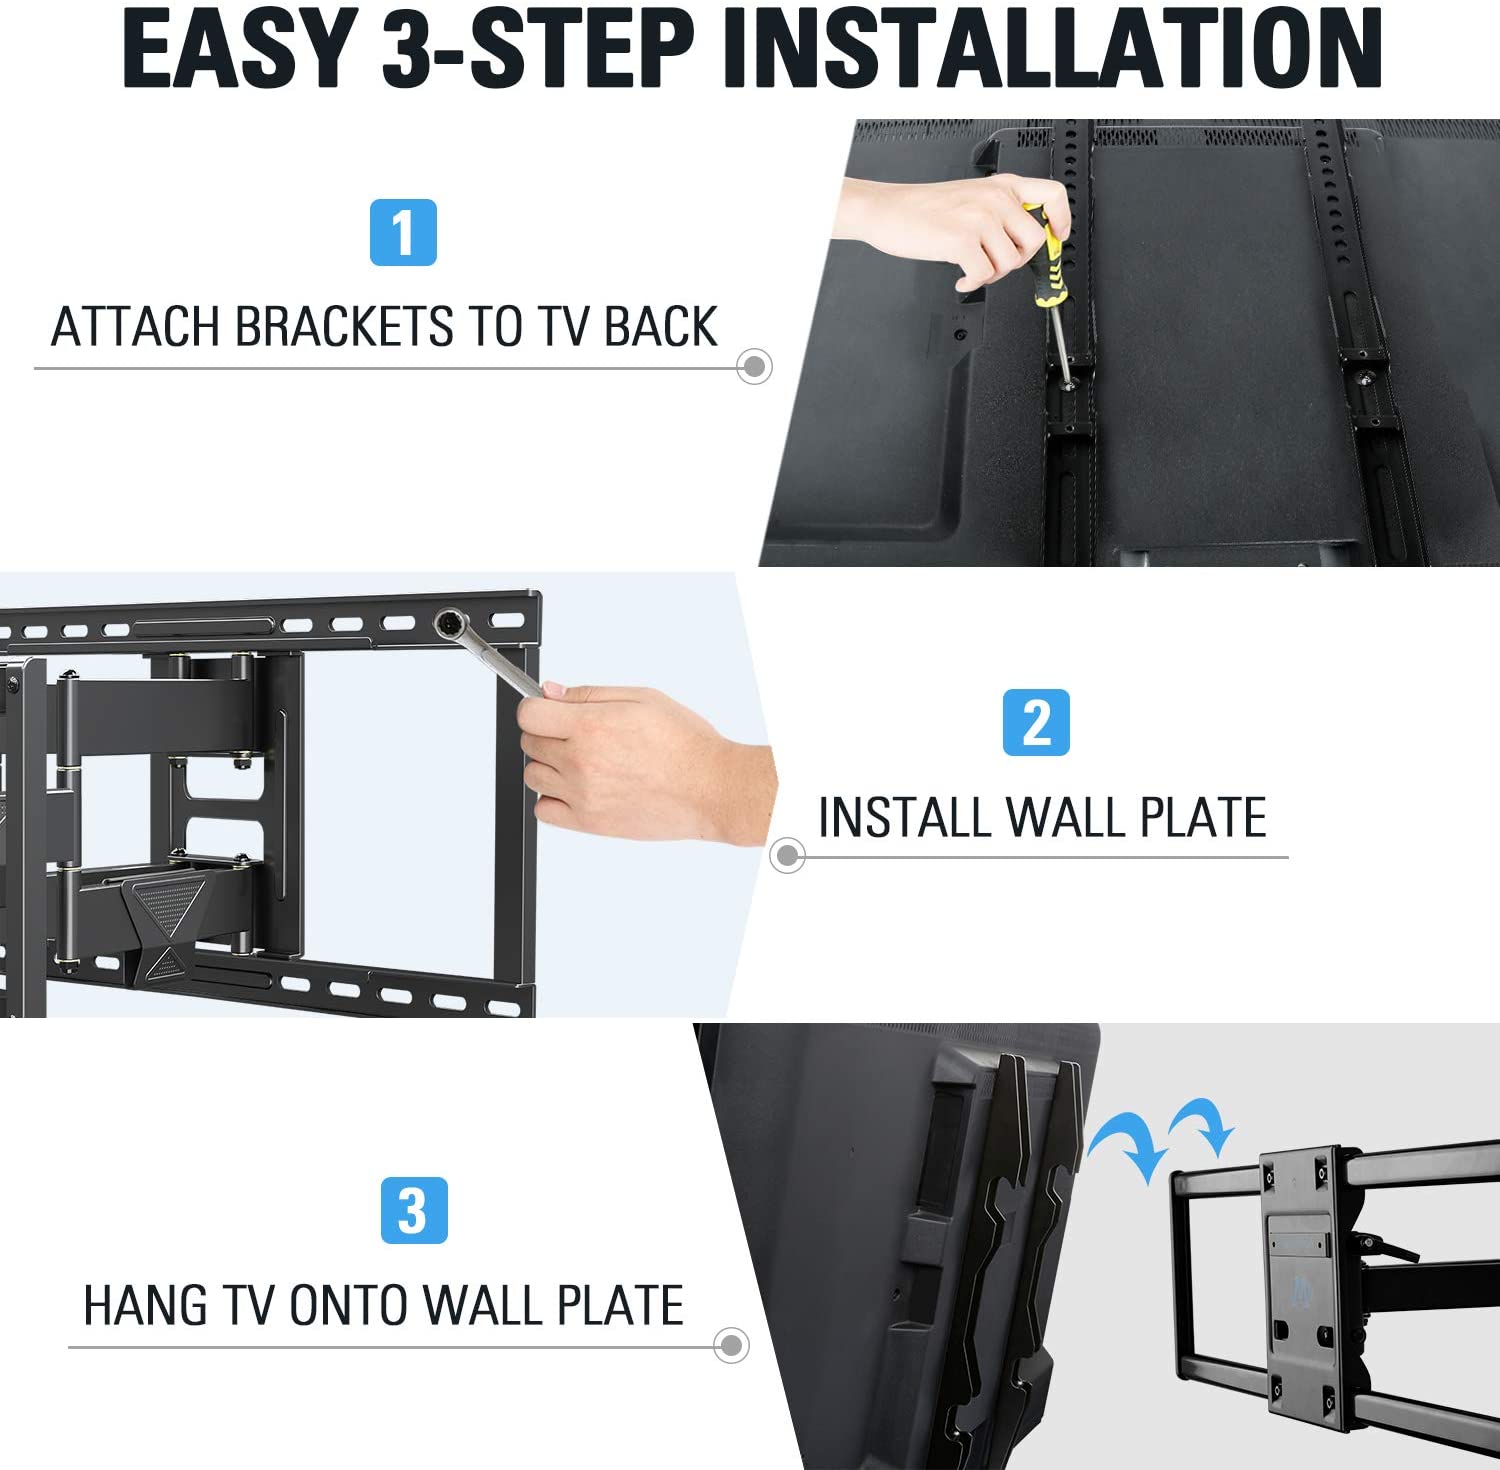 it is easy to install the large TV mount MD2298-XL